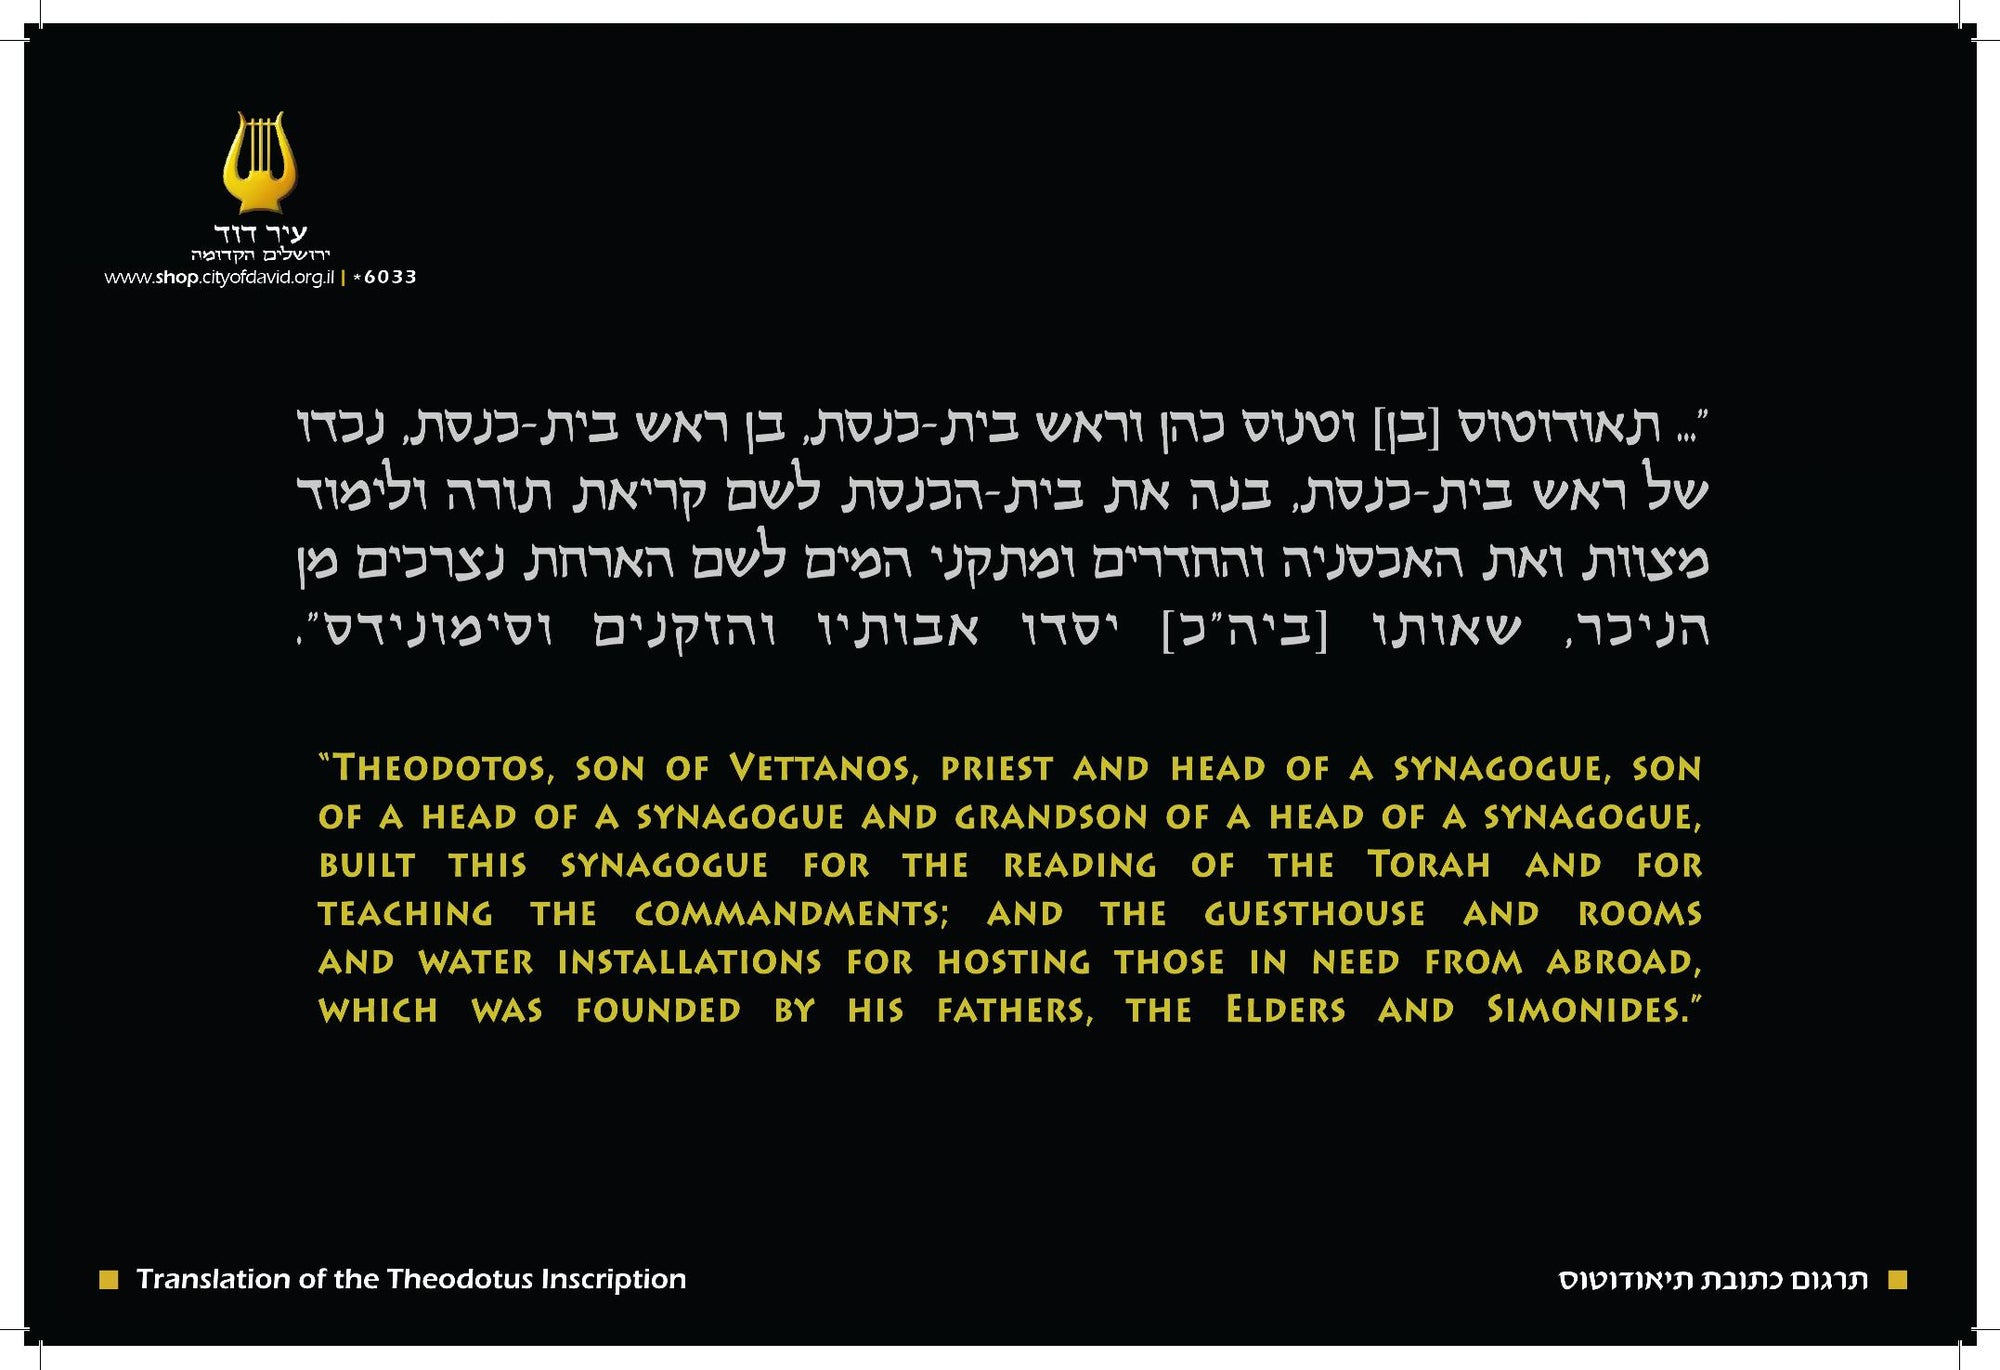 POSTERS /  THE THEODUS inscription